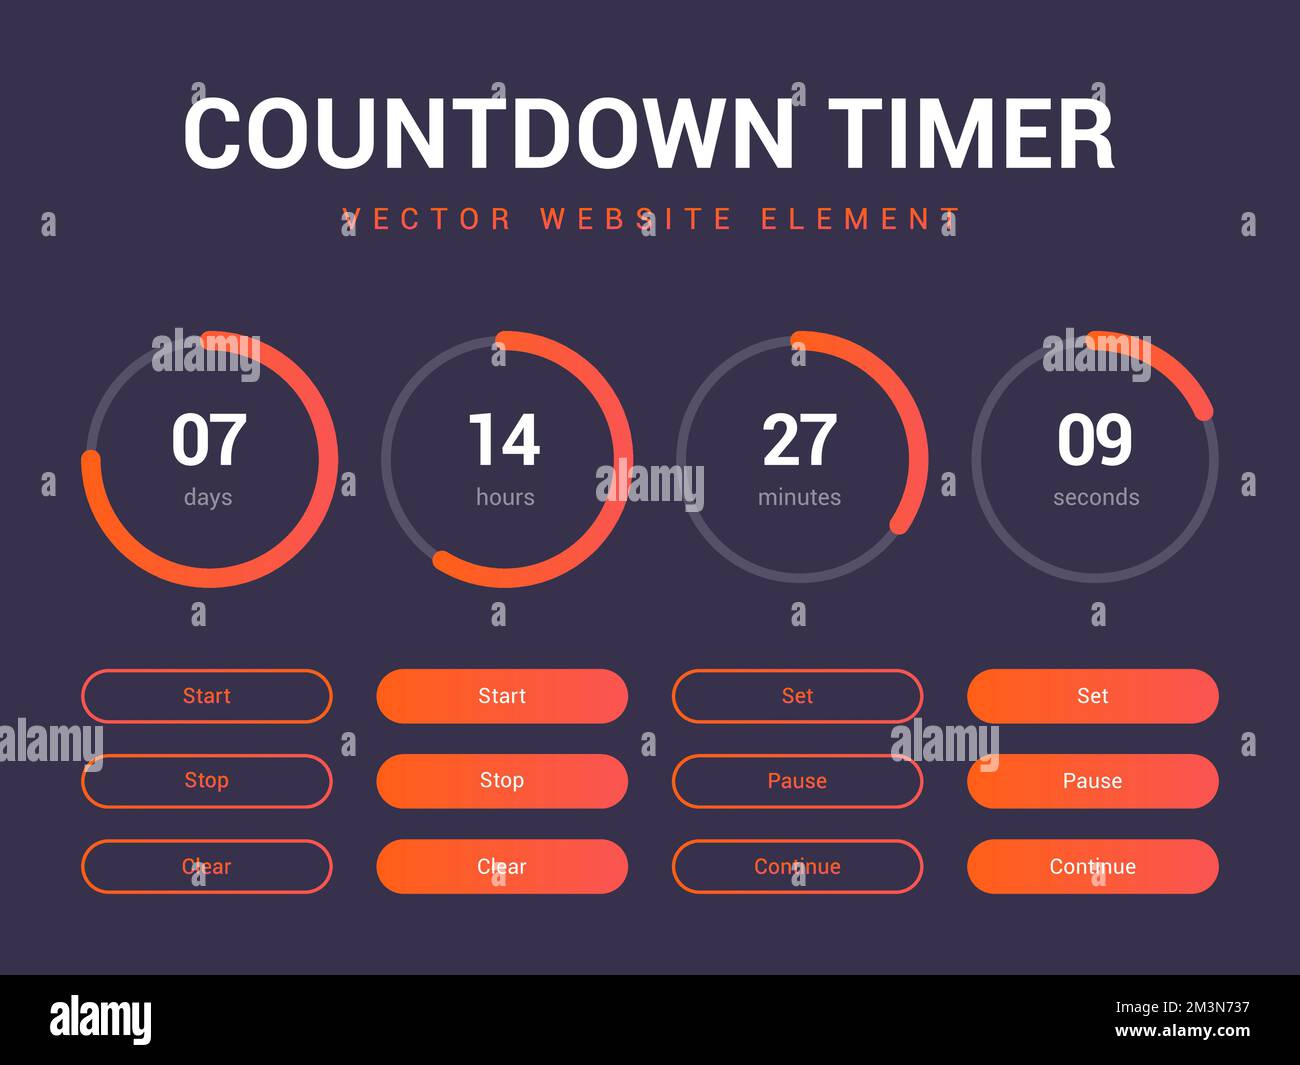 https://c8.alamy.com/comp/2M3N737/countdown-timer-vector-website-element-with-buttons-flat-digital-clock-timer-application-template-countdown-timer-for-coming-soon-2M3N737.jpg